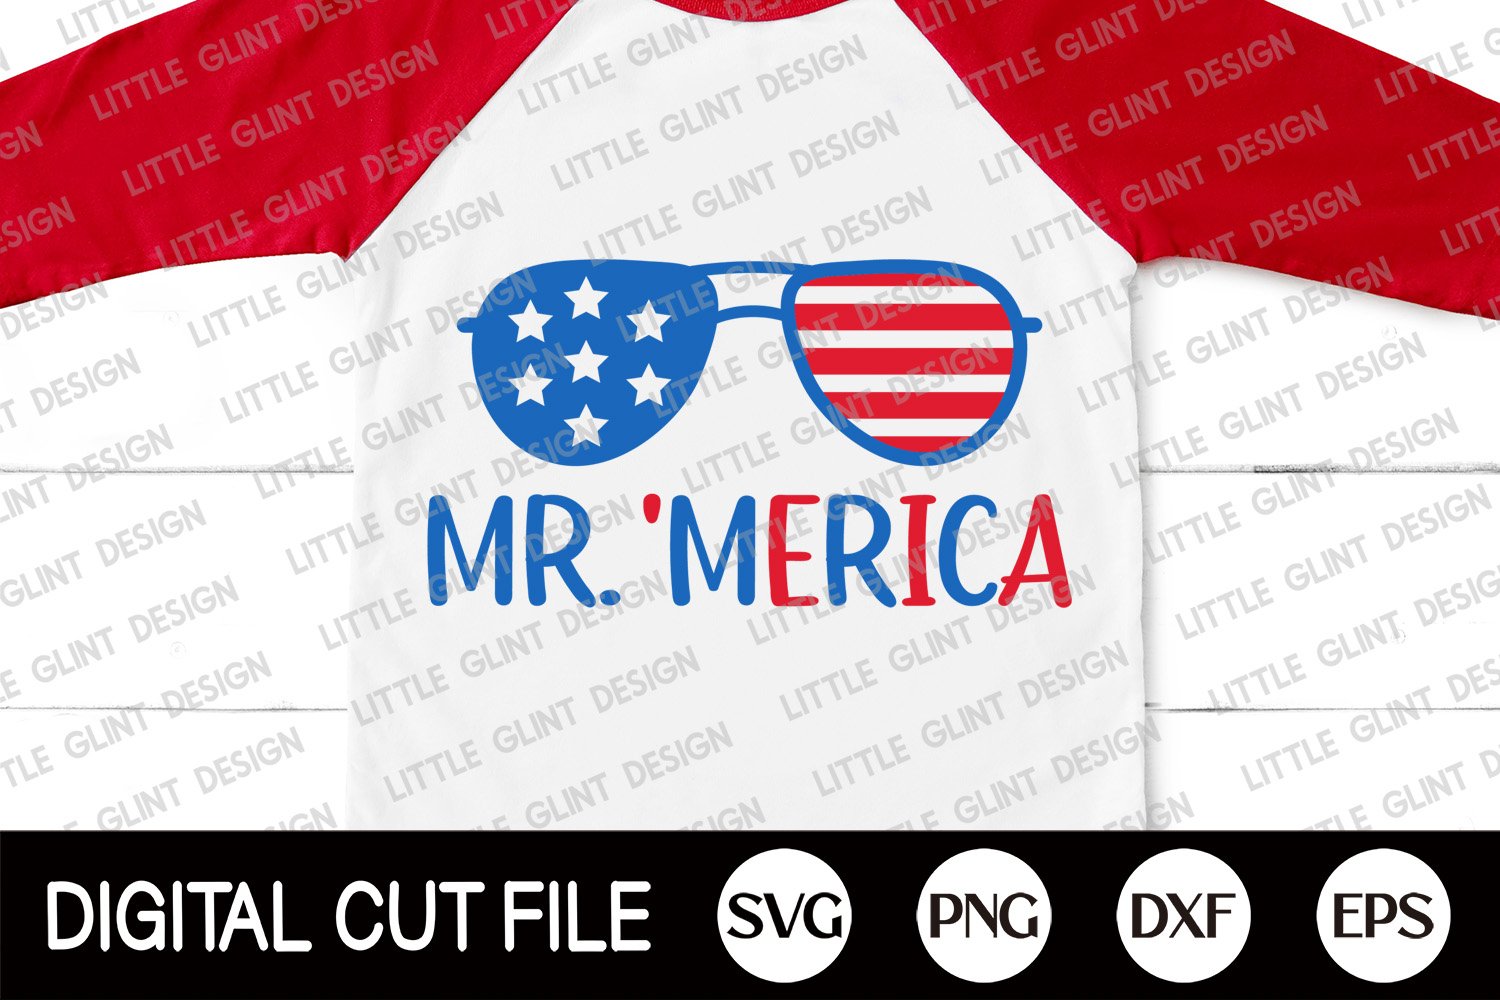 Print on clothes with American style.